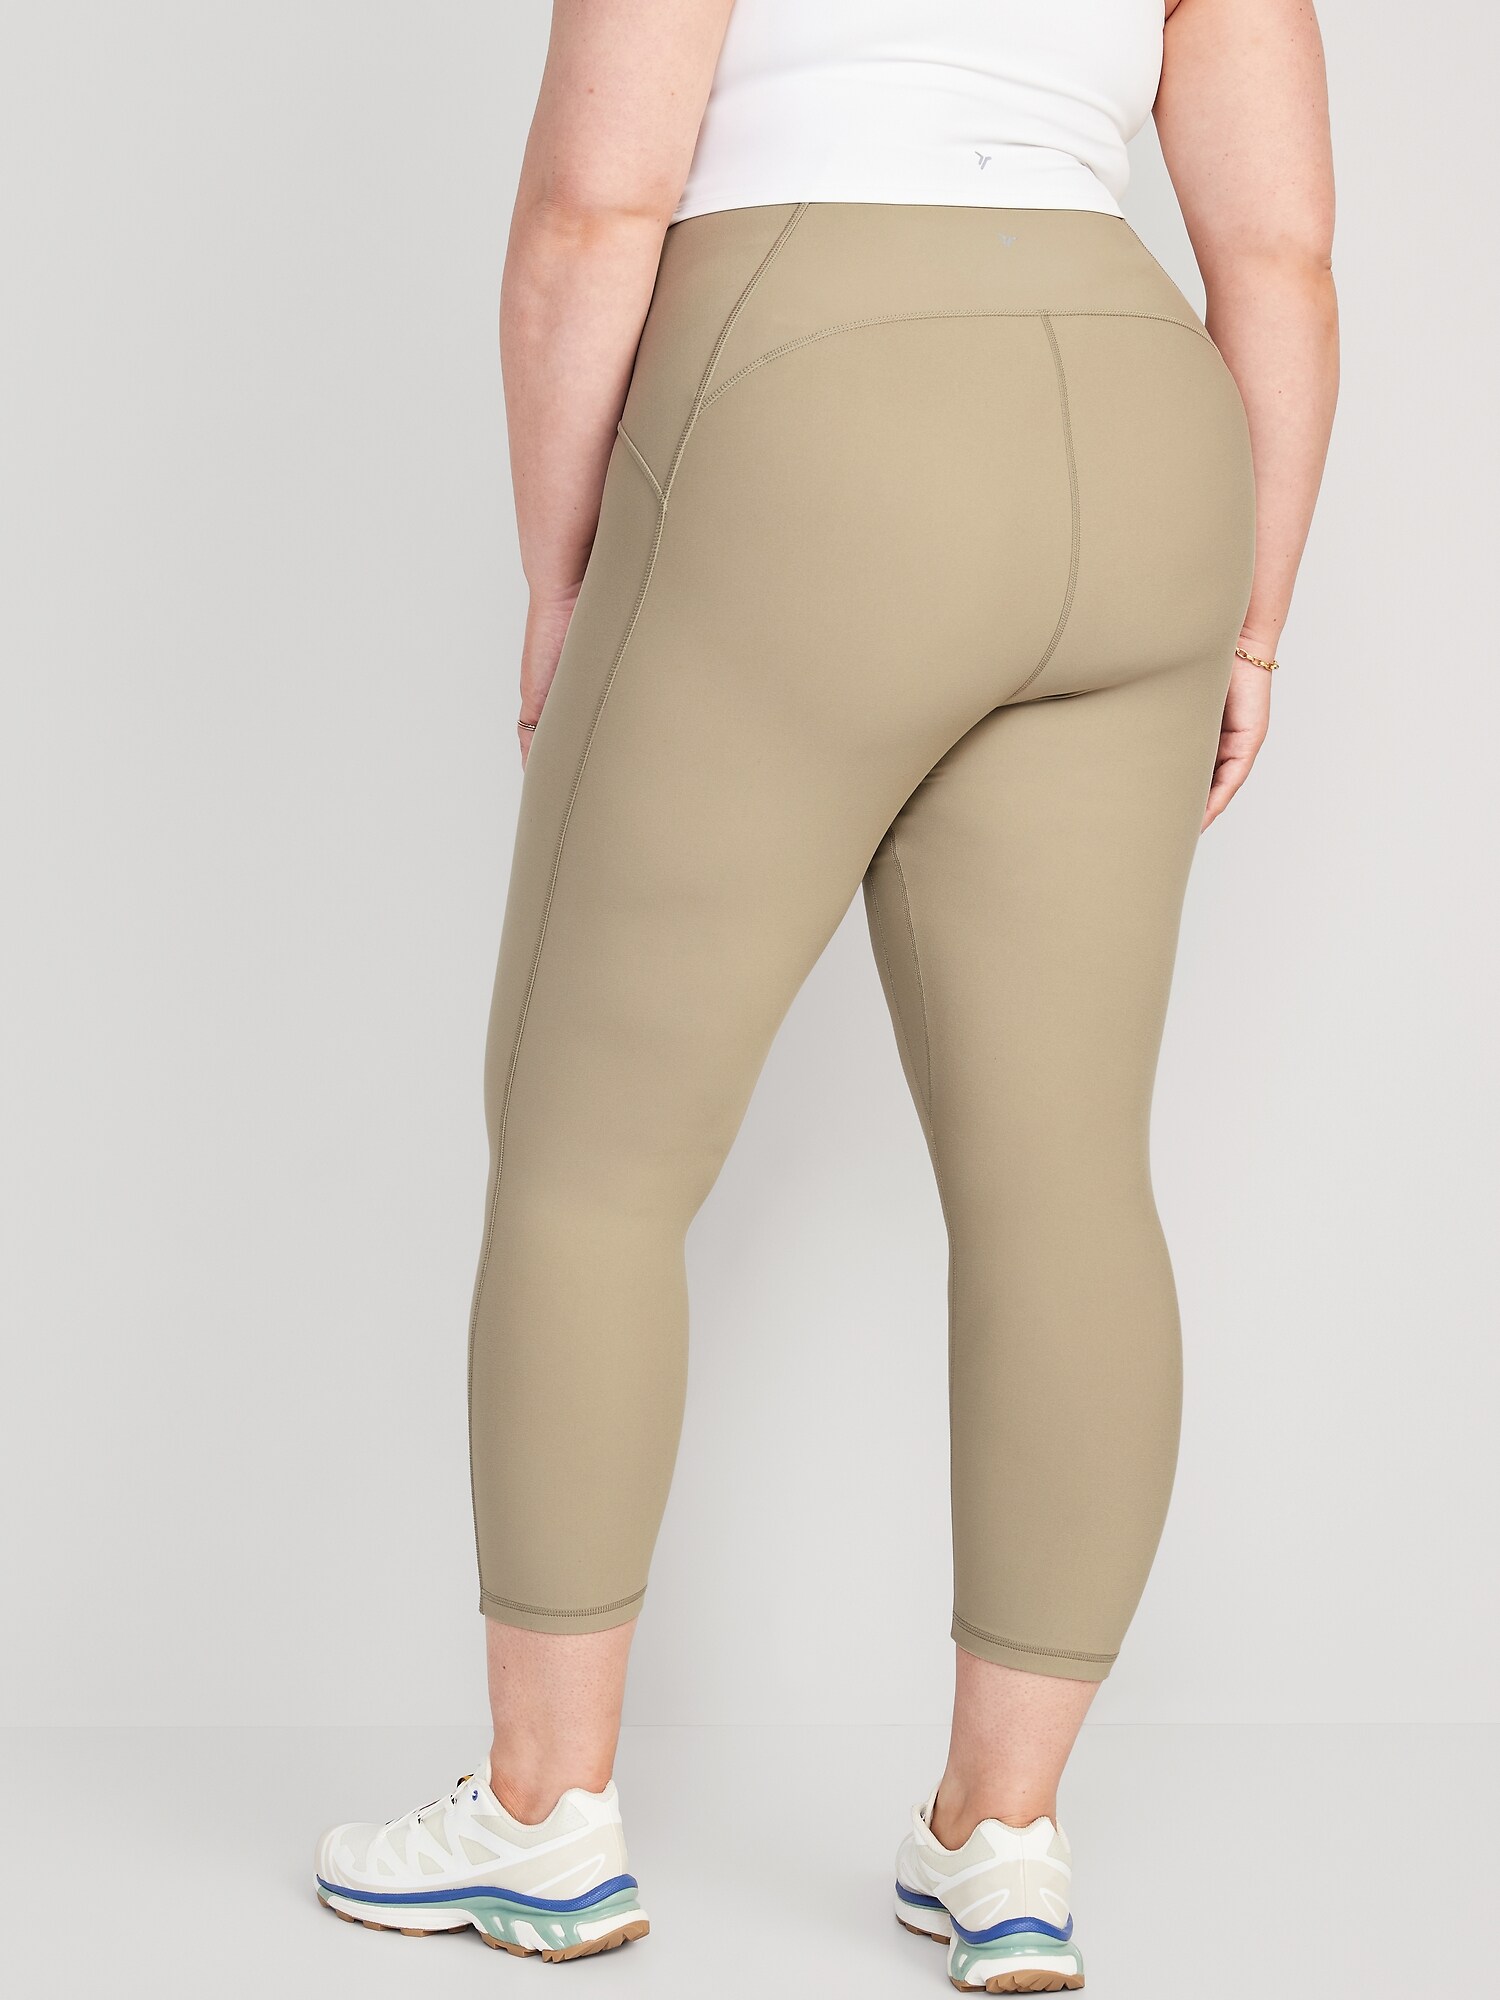 Chasing Happiness High Waist Active Legging In Peach • Impressions